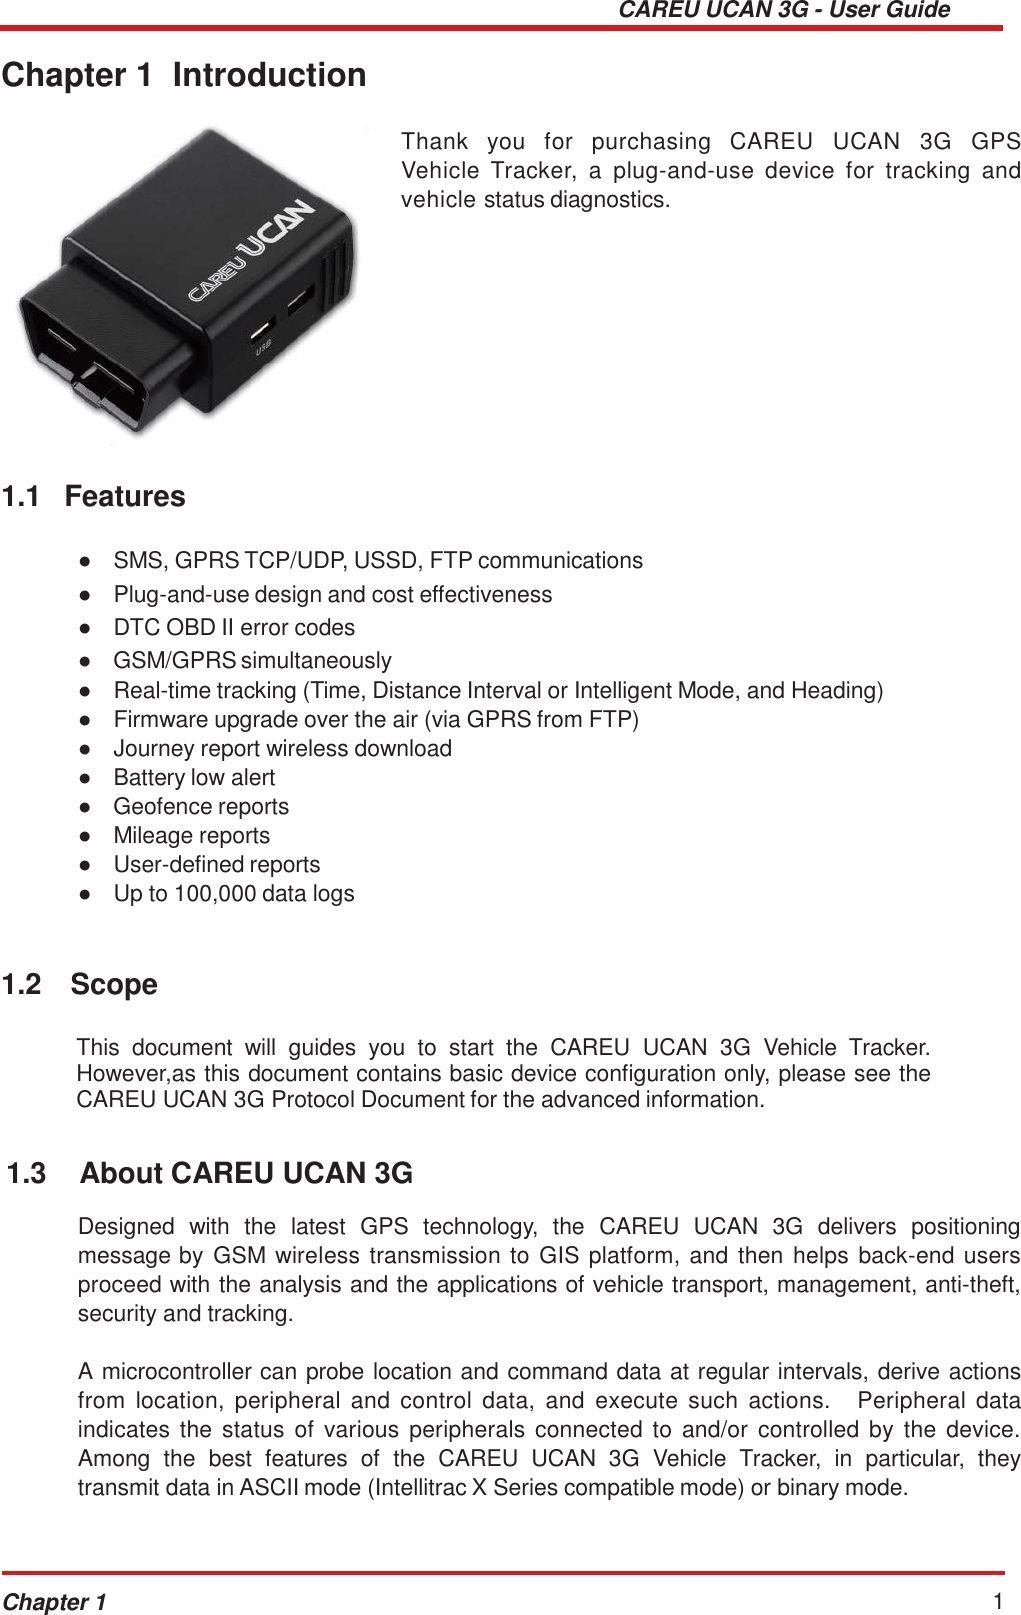 CAREU UCAN 3G - User Guide Chapter 1 1    Chapter 1  Introduction     1.1  Features     Thank  you  for  purchasing  CAREU  UCAN  3G  GPS Vehicle  Tracker,  a  plug-and-use  device  for  tracking  and vehicle status diagnostics.   ●   SMS, GPRS TCP/UDP, USSD, FTP communications ●   Plug-and-use design and cost effectiveness ●   DTC OBD II error codes ●   GSM/GPRS simultaneously ●   Real-time tracking (Time, Distance Interval or Intelligent Mode, and Heading) ●   Firmware upgrade over the air (via GPRS from FTP) ●   Journey report wireless download ●   Battery low alert ●   Geofence reports ●   Mileage reports ●   User-defined reports ●   Up to 100,000 data logs    1.2  Scope   This  document  will  guides  you  to  start  the  CAREU  UCAN  3G  Vehicle  Tracker. However,as this document contains basic device configuration only, please see the CAREU UCAN 3G Protocol Document for the advanced information.   1.3  About CAREU UCAN 3G   Designed  with  the  latest  GPS  technology,  the  CAREU  UCAN  3G  delivers  positioning message by GSM wireless  transmission to GIS platform, and then  helps  back-end users proceed with the analysis and the applications of vehicle transport, management, anti-theft, security and tracking.  A microcontroller can probe location and command data at regular intervals, derive actions from  location,  peripheral  and  control  data,  and  execute  such  actions.   Peripheral  data indicates the  status  of  various  peripherals connected to  and/or  controlled  by  the  device. Among  the  best  features  of  the  CAREU  UCAN  3G  Vehicle  Tracker,  in  particular,  they transmit data in ASCII mode (Intellitrac X Series compatible mode) or binary mode. 